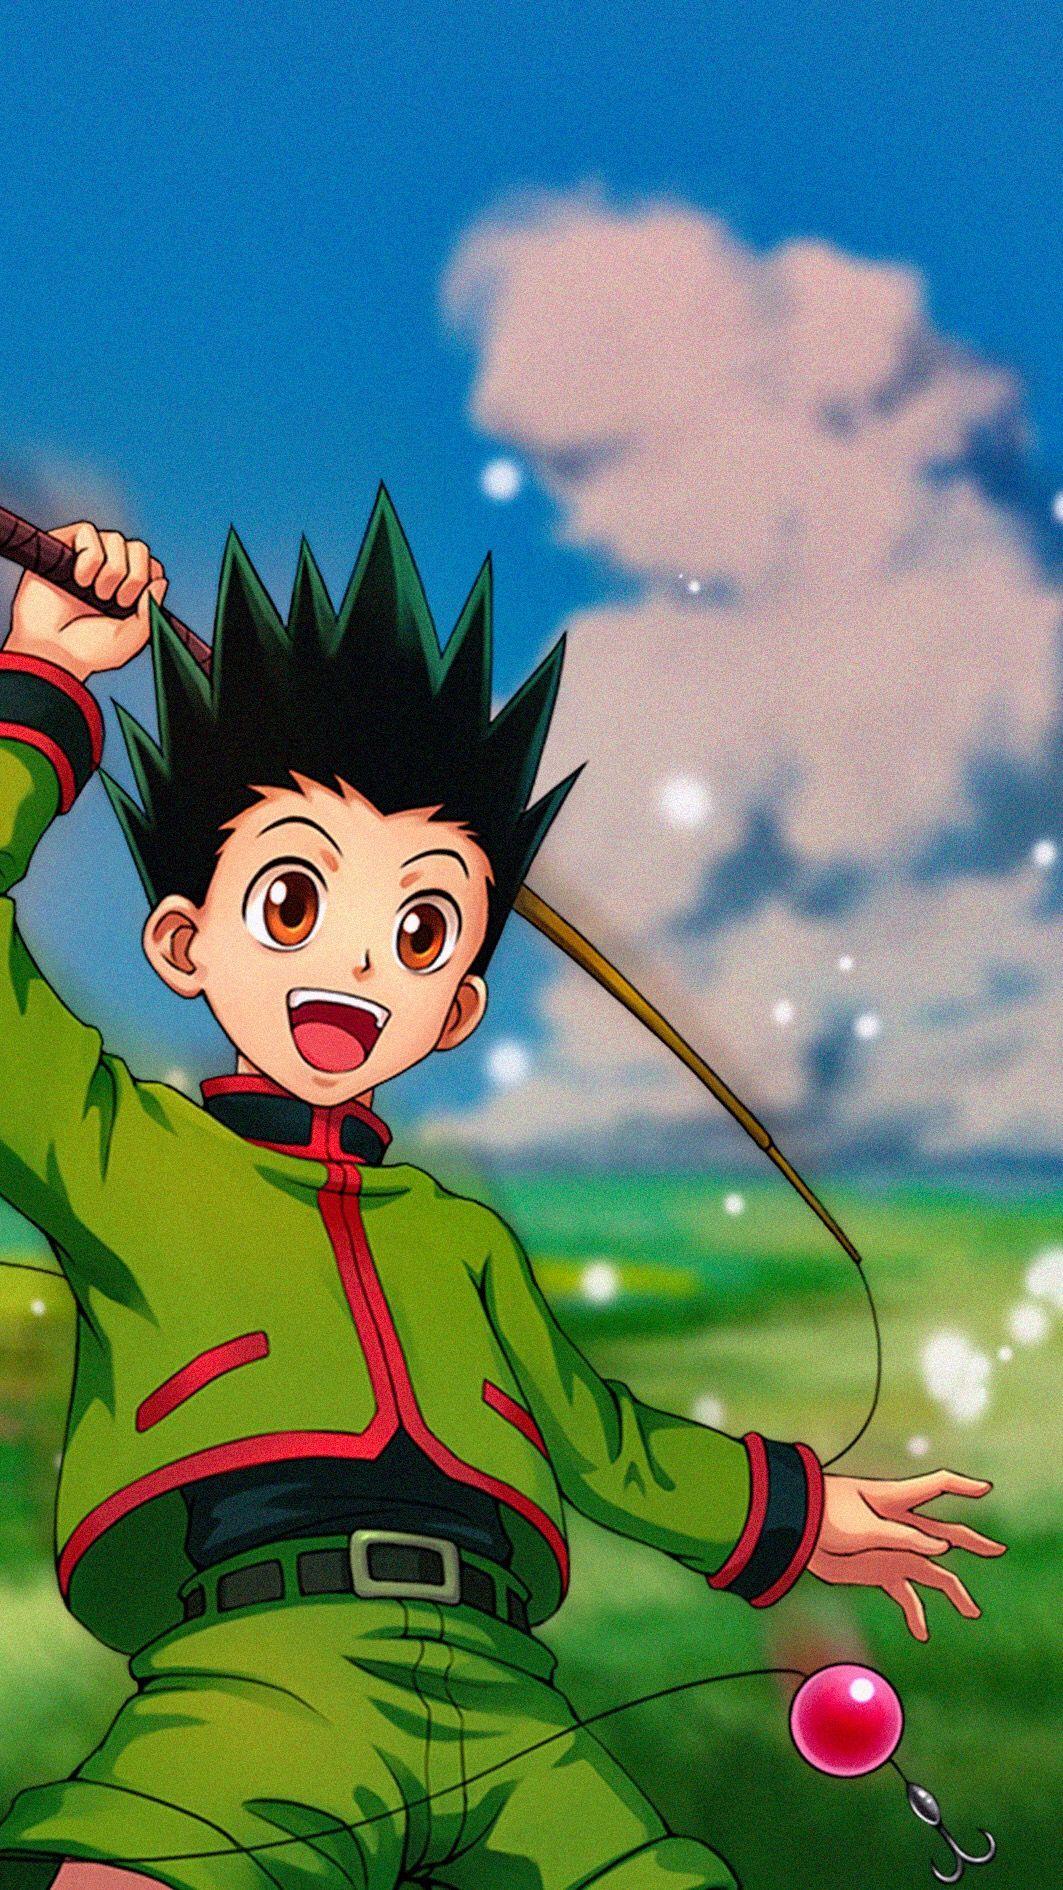 4 Gon Freecss Wallpapers for iPhone and Android by Chelsea Reed